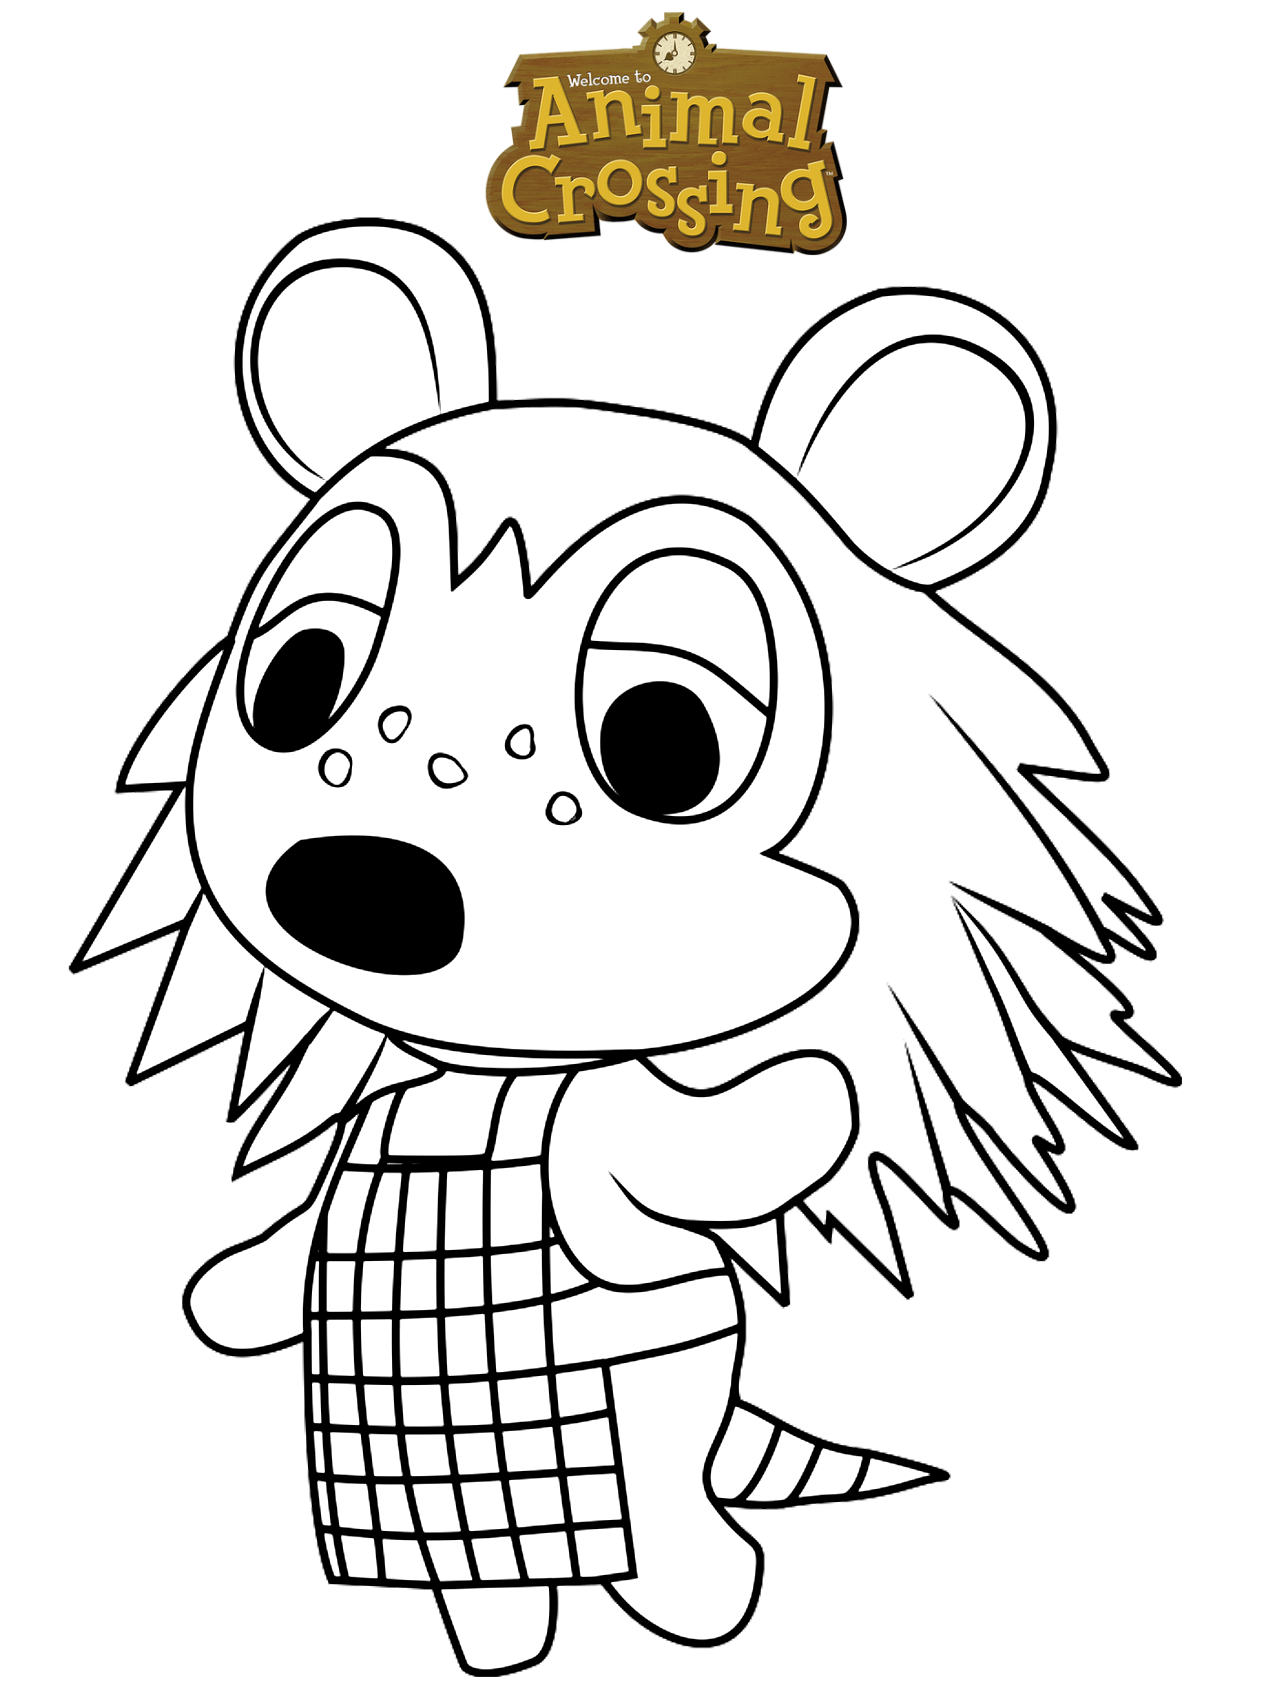 Cute Animal Crossing New Horizons Coloring Pages Pdf - sable Animal Crossing New Horizons Coloring Pages